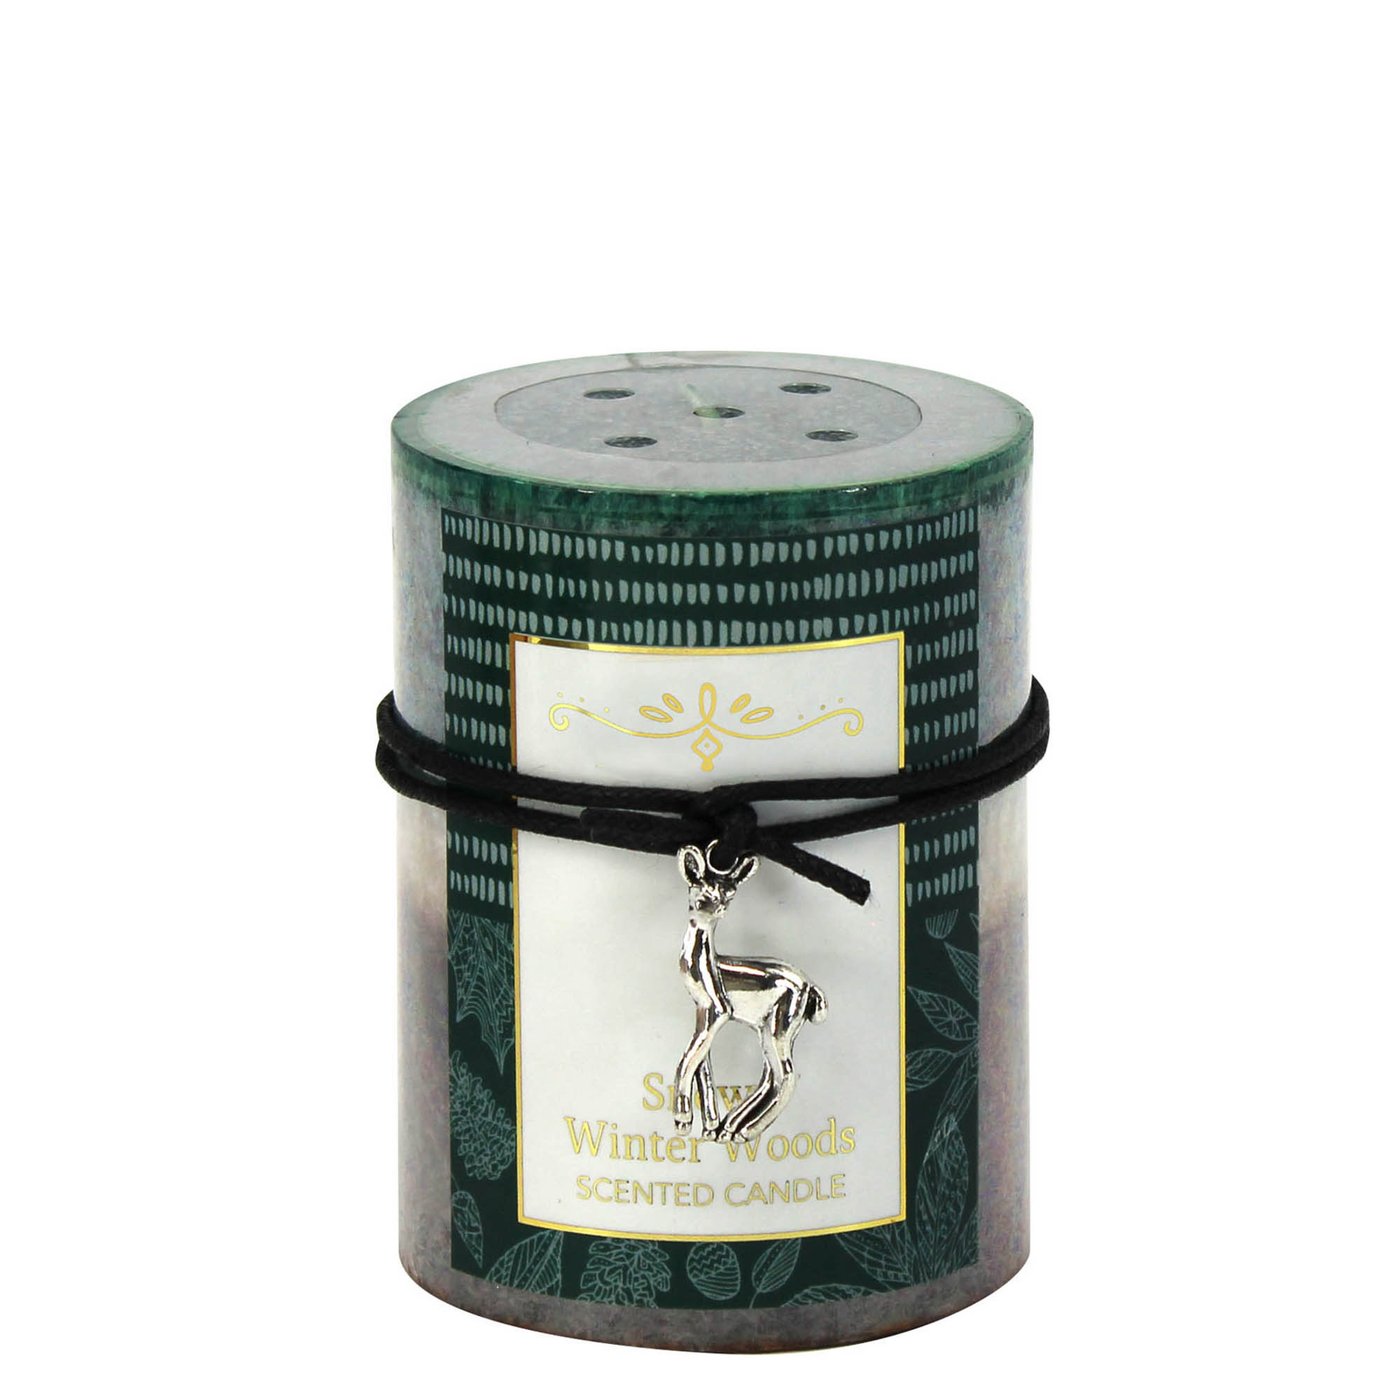 SNOWY WINTER WOODS SCENTED CANDLE 3X4